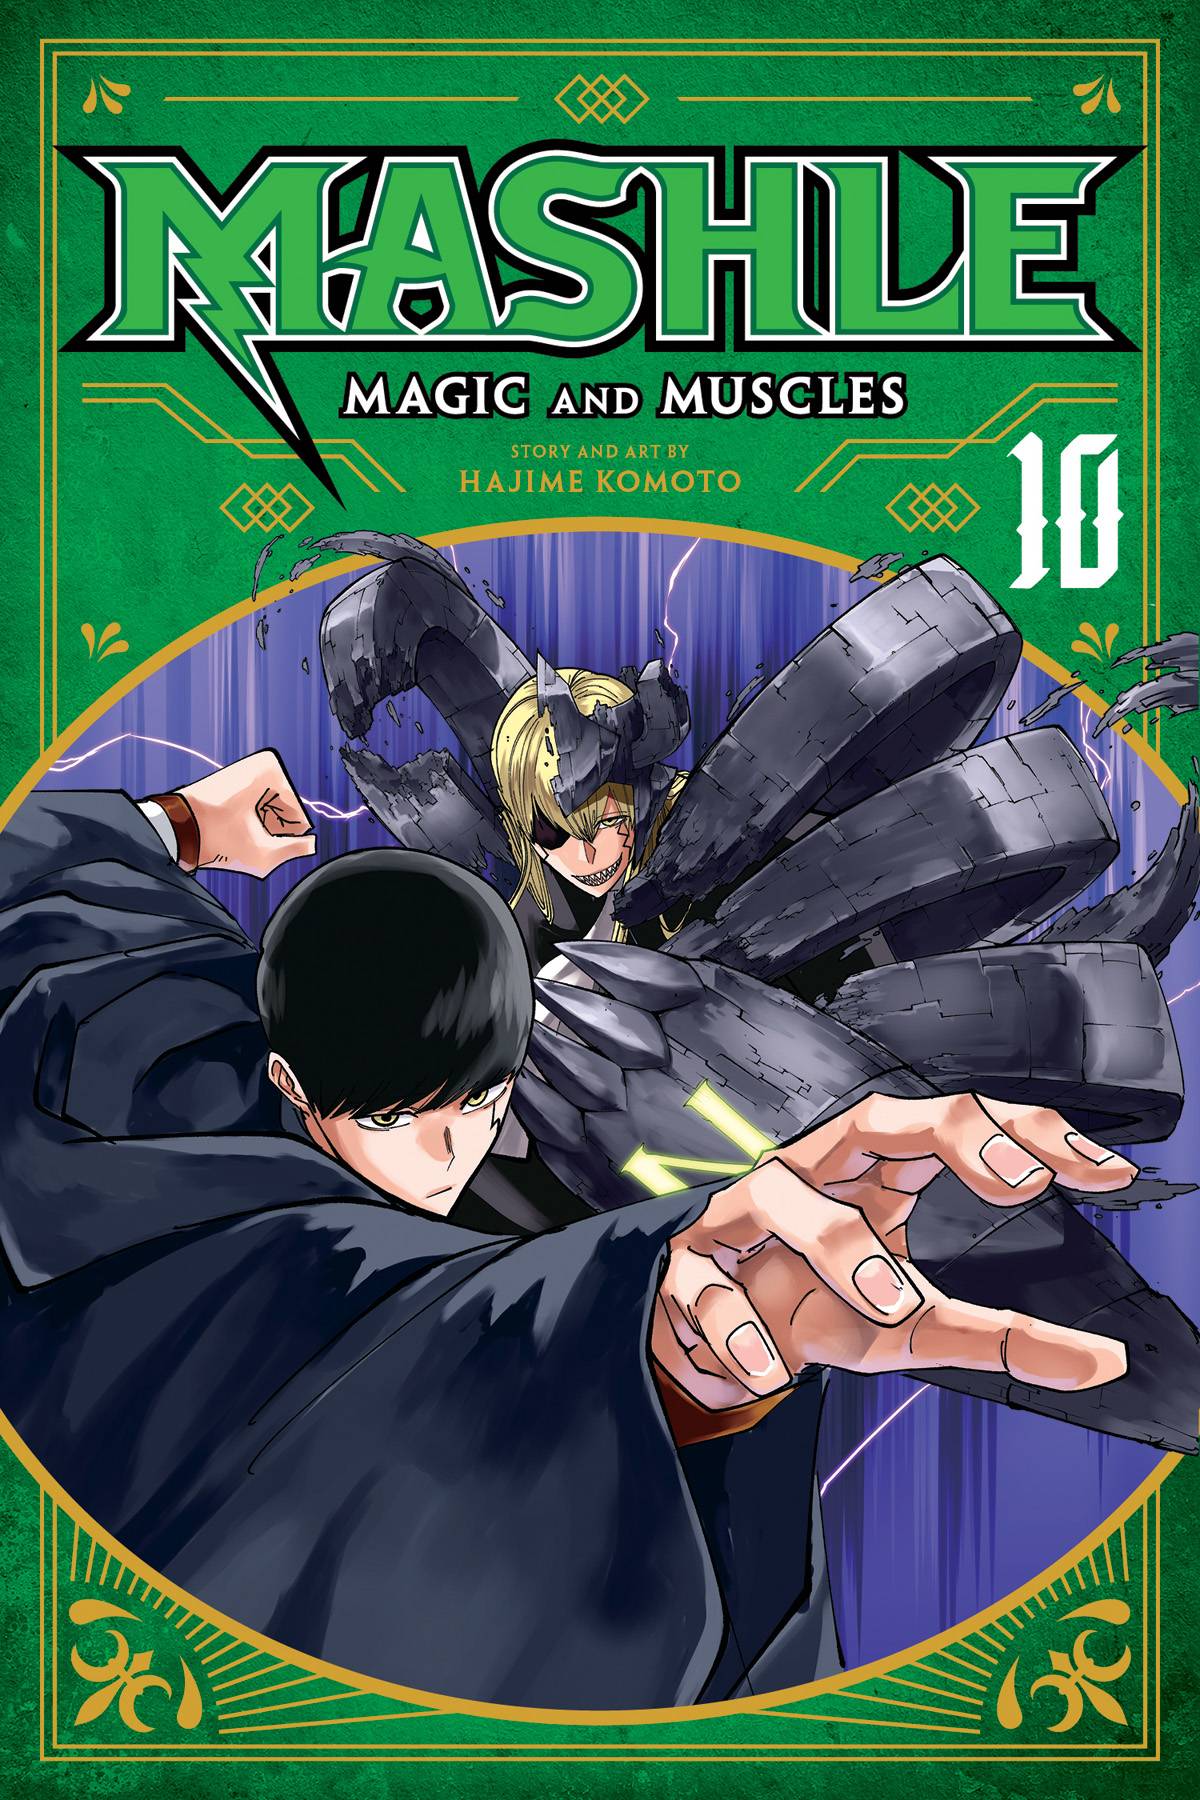 Mashle: Magic And Muscles Episode 10 Release Date And Time